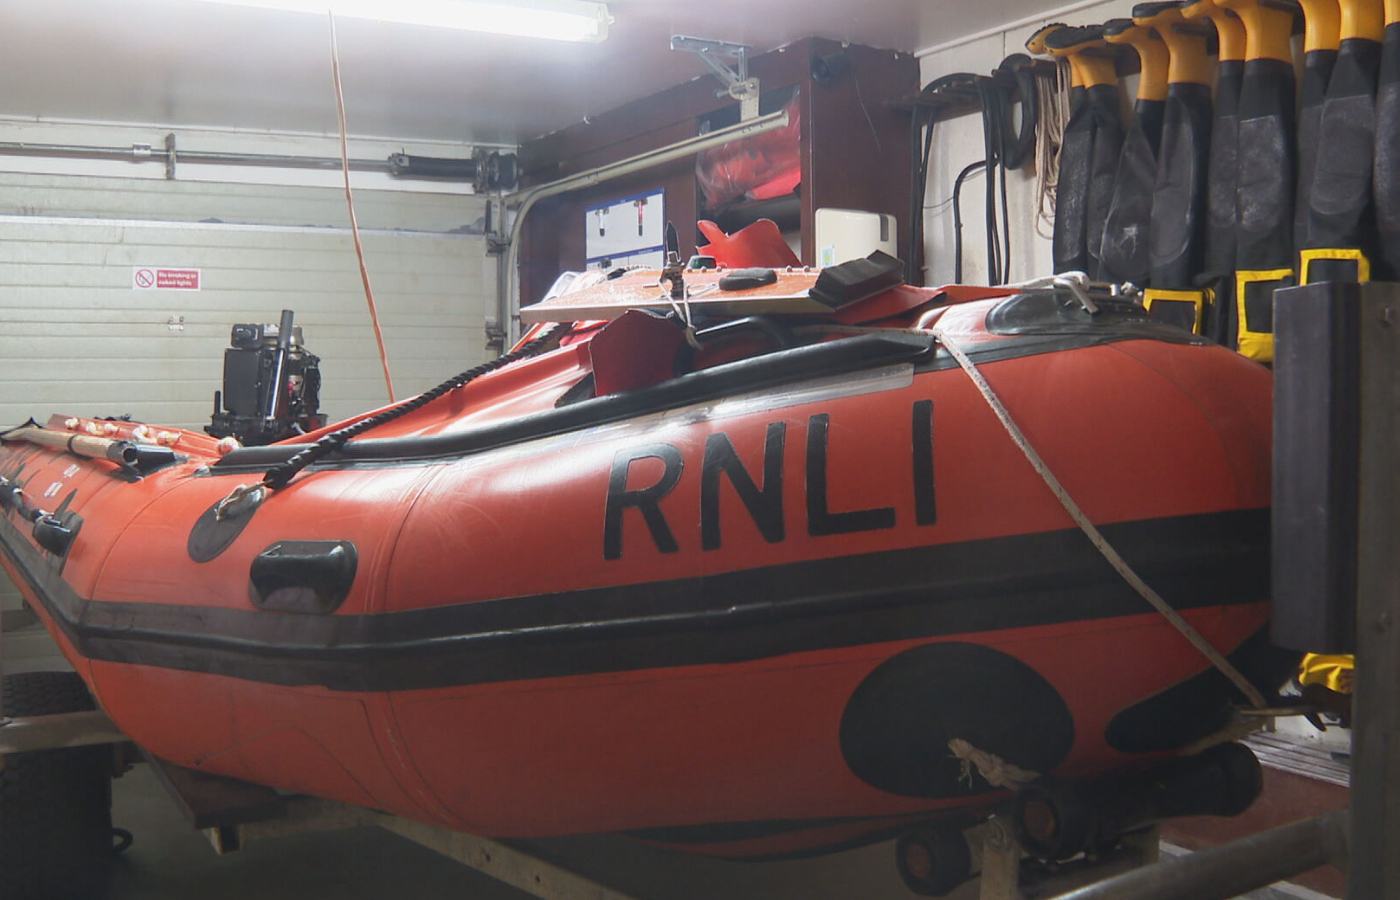 Volunteers at Arbroath have expressed anger after receiving an open Atlantic 85 rigid inflatable boat. 